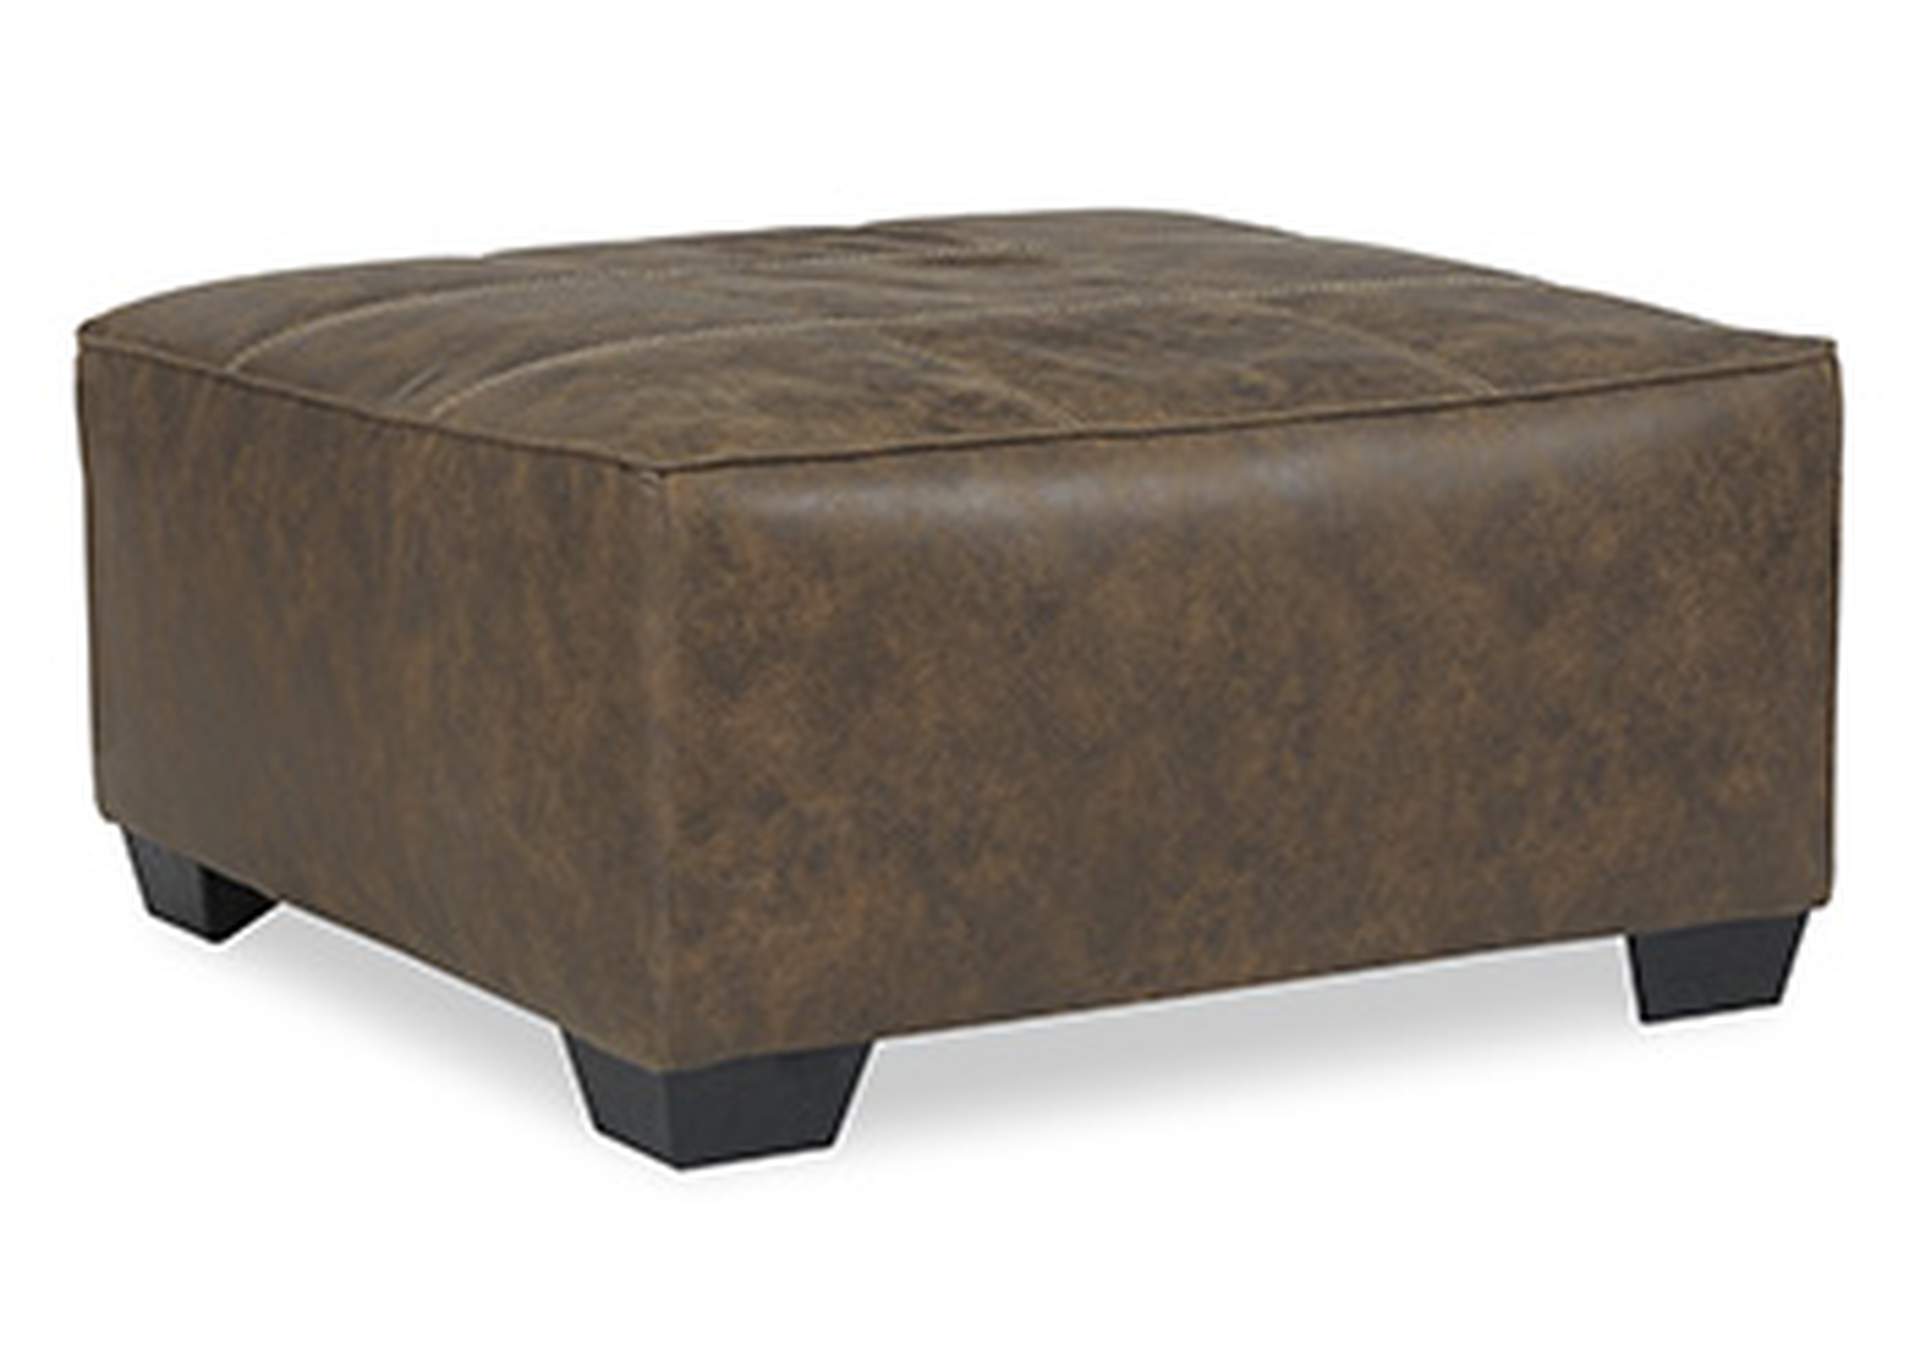 Abalone Oversized Accent Ottoman,Benchcraft